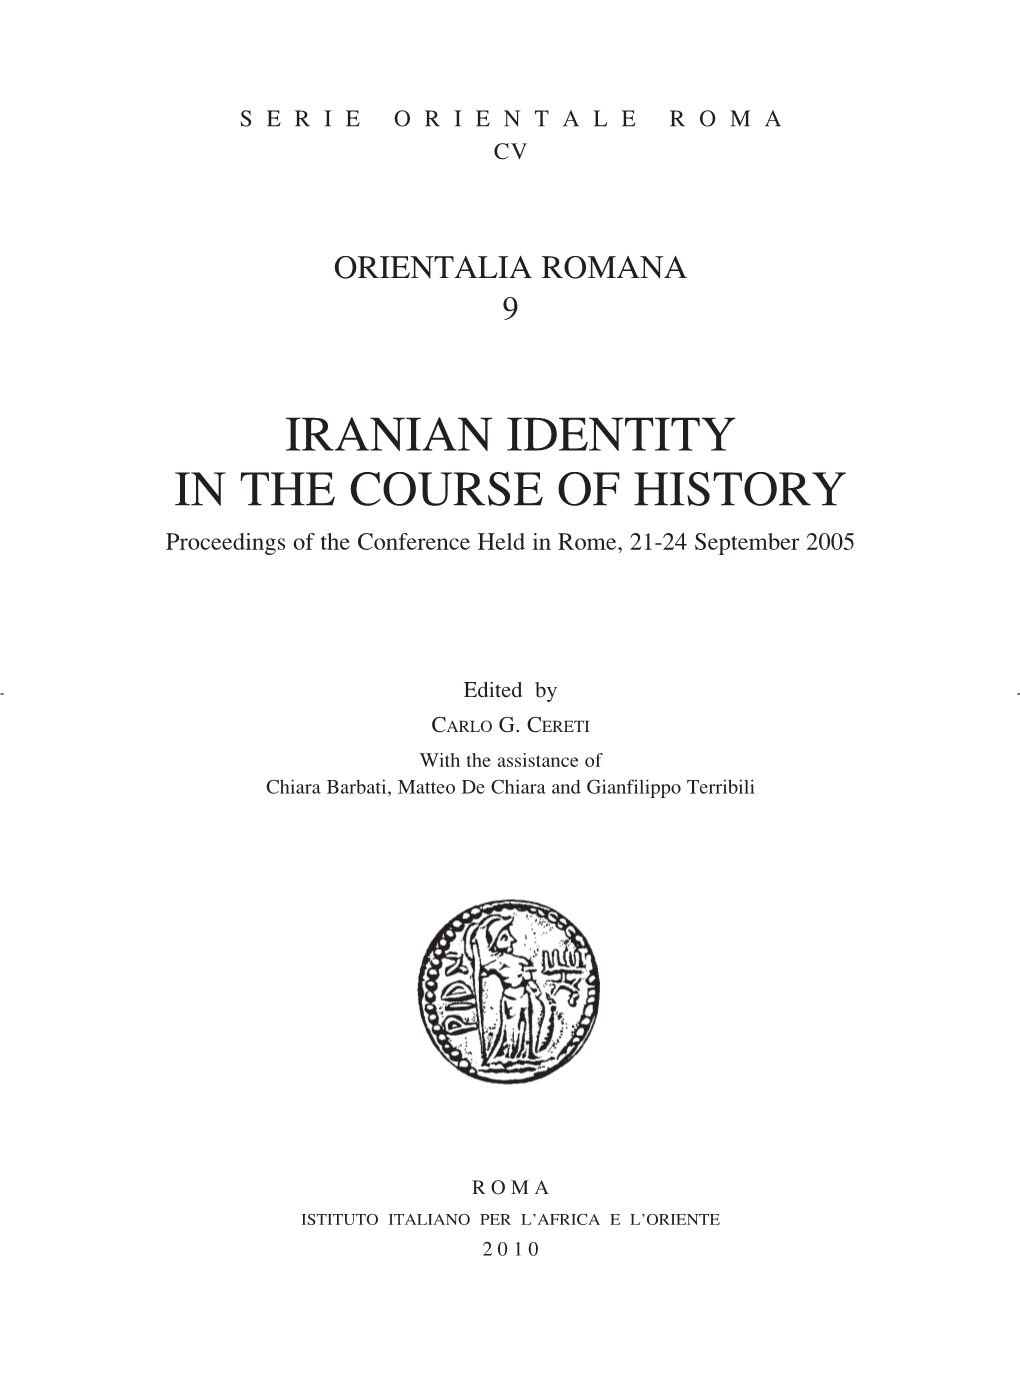 IRANIAN IDENTITY in the COURSE of HISTORY Proceedings of the Conference Held in Rome, 21-24 September 2005